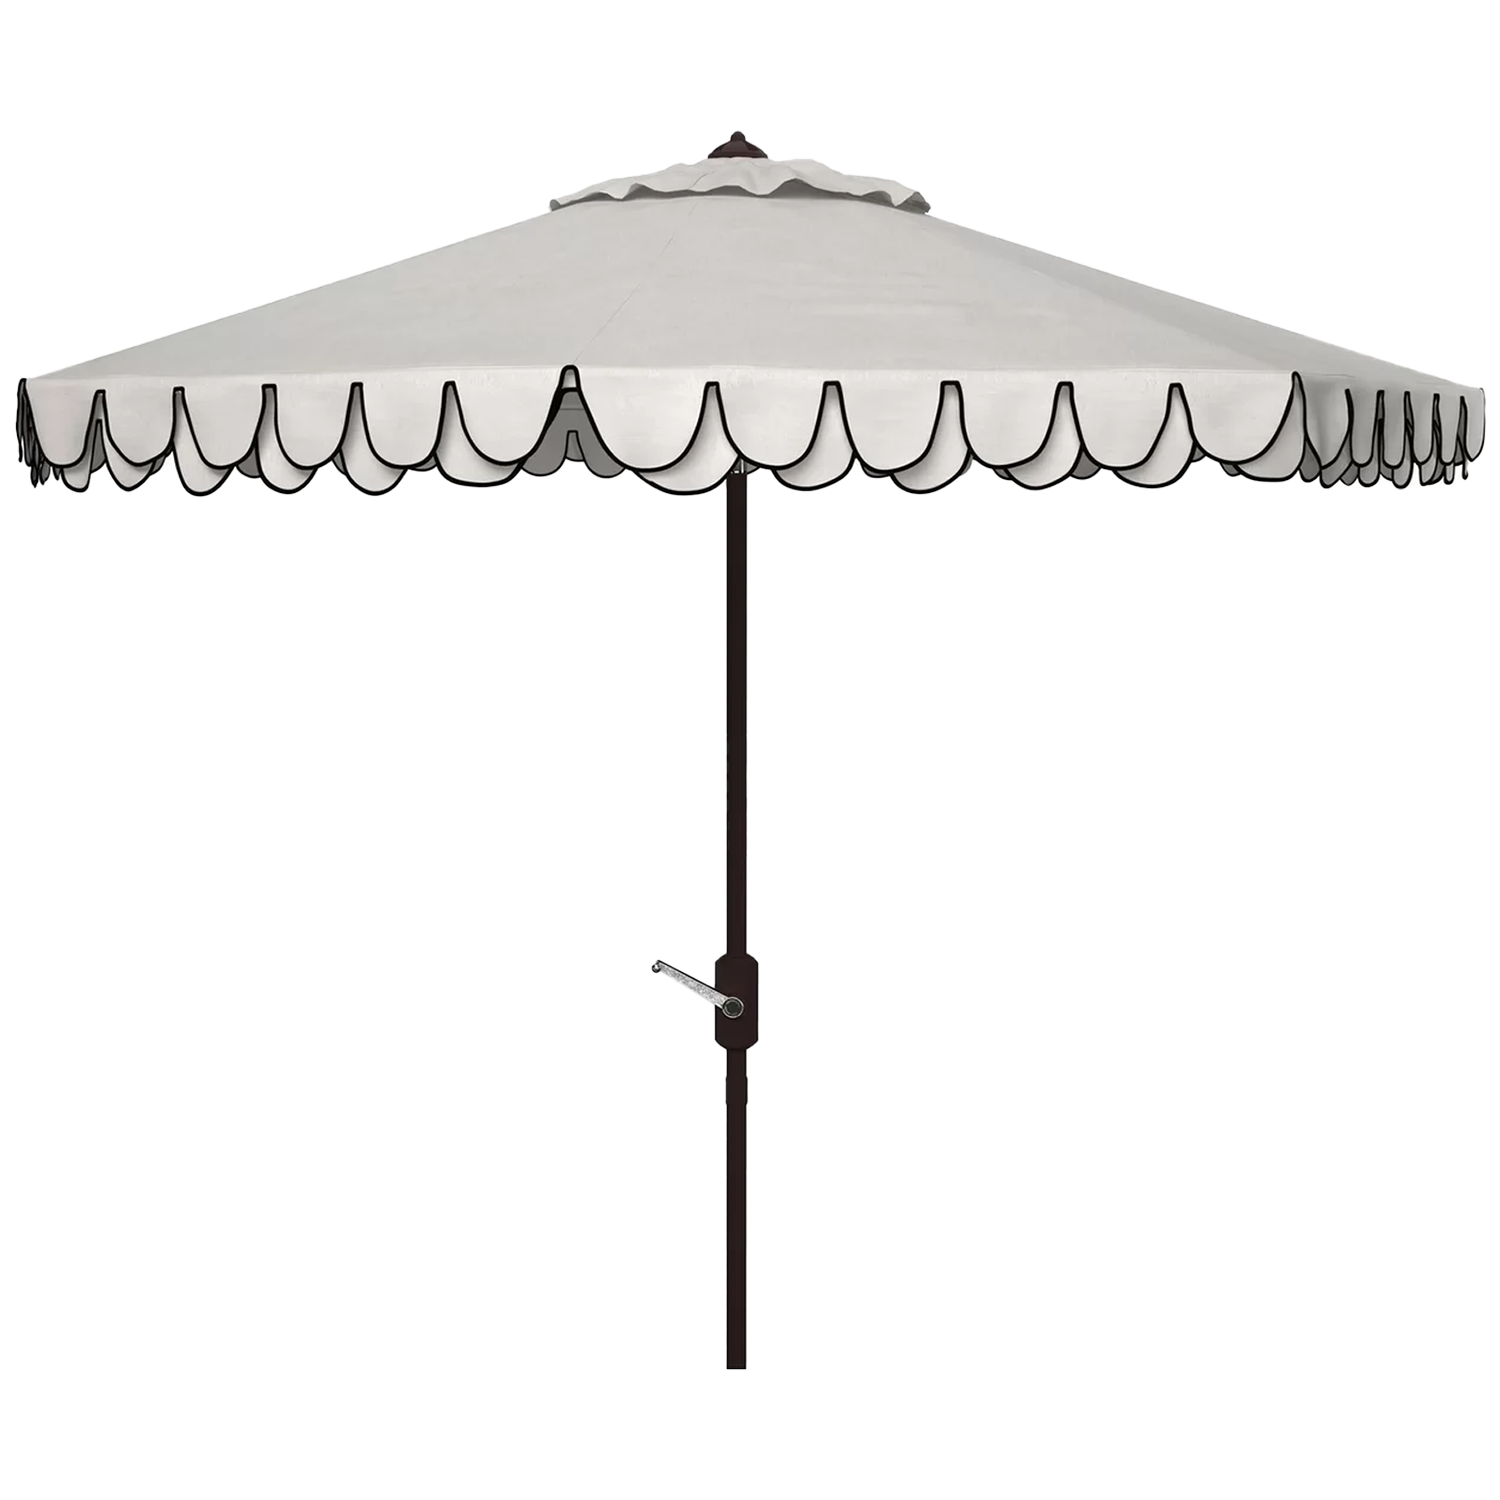 A Chic Scalloped Umbrella Stars in Wayfair’s Extra 20% Off Memorial Day Sale